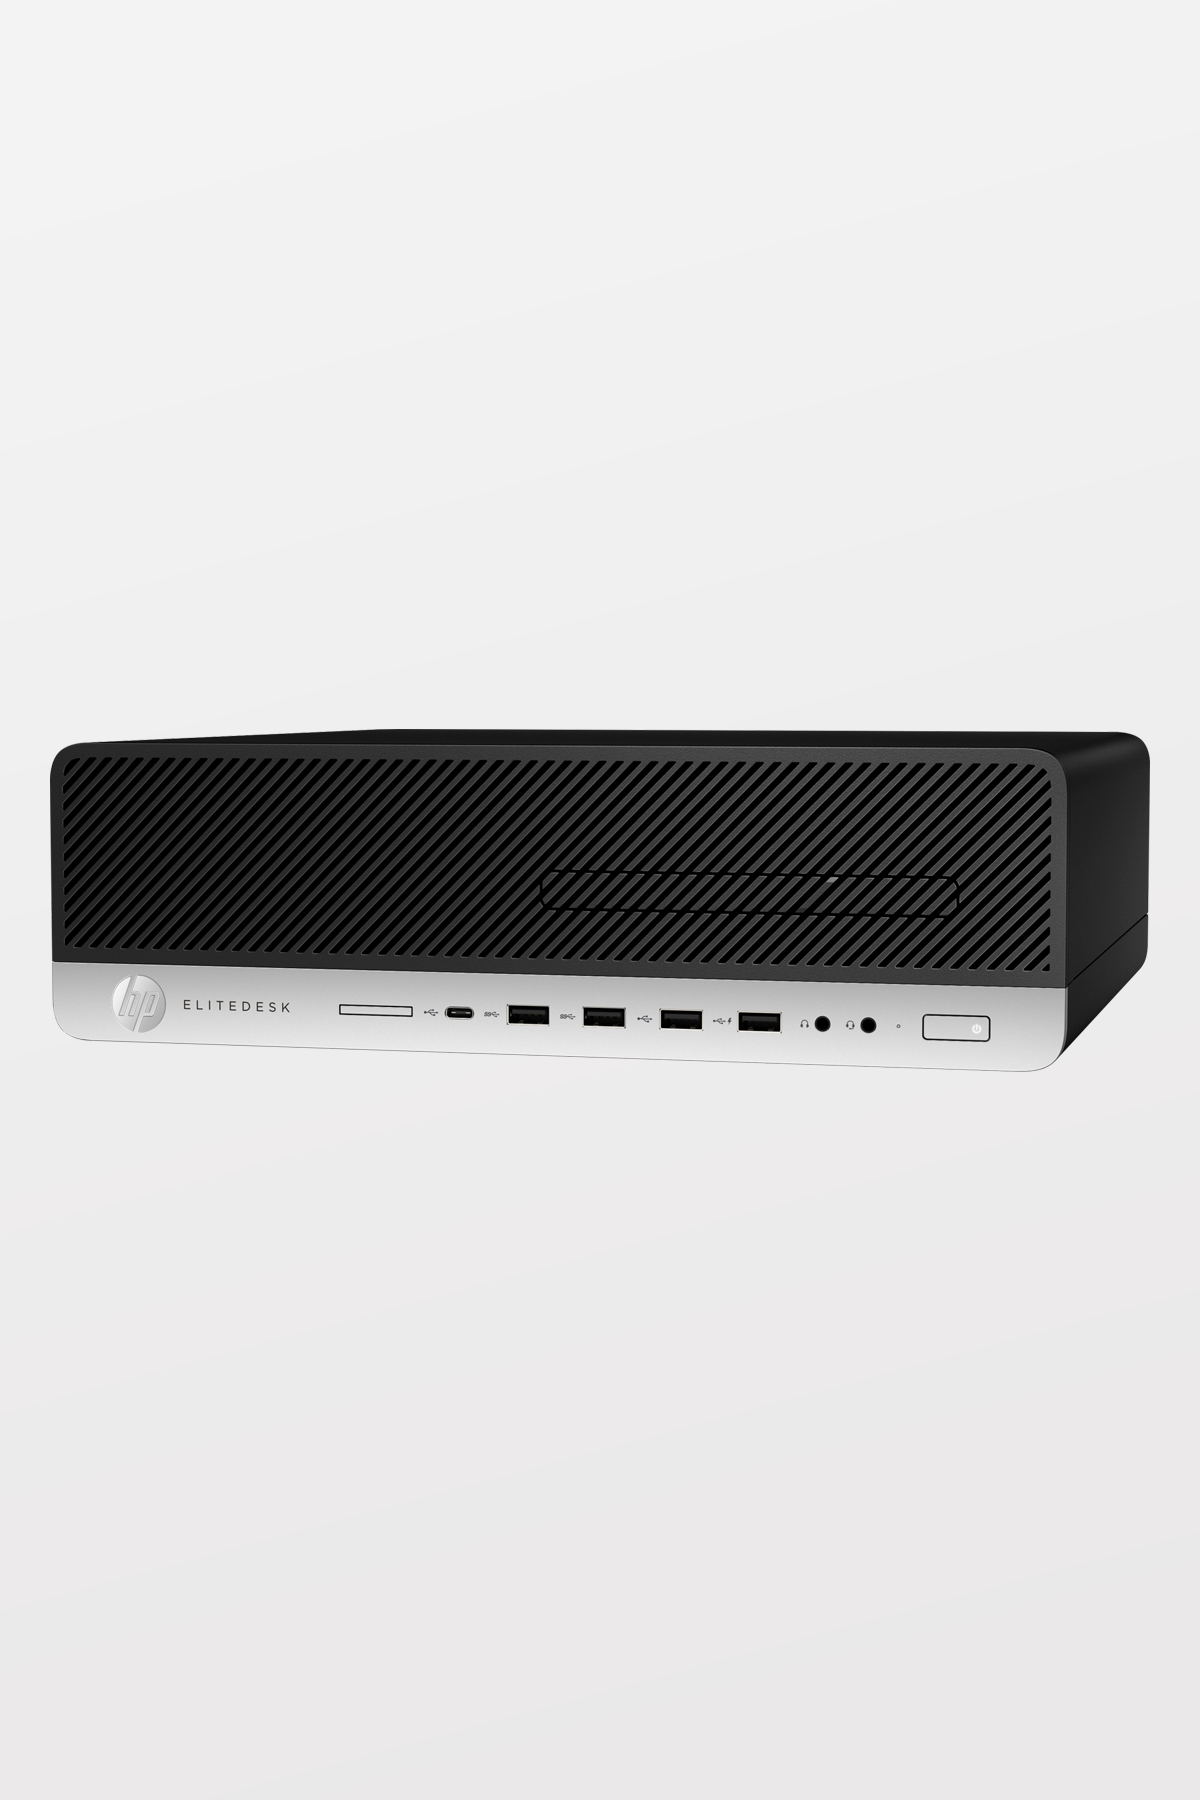 HP - EliteDesk 800 G4 Small Form Factor PC, i7-8700, 16Gb, 512Gb SSD, KB & MOUSE, W10P 64, 3/3/3 Warranty